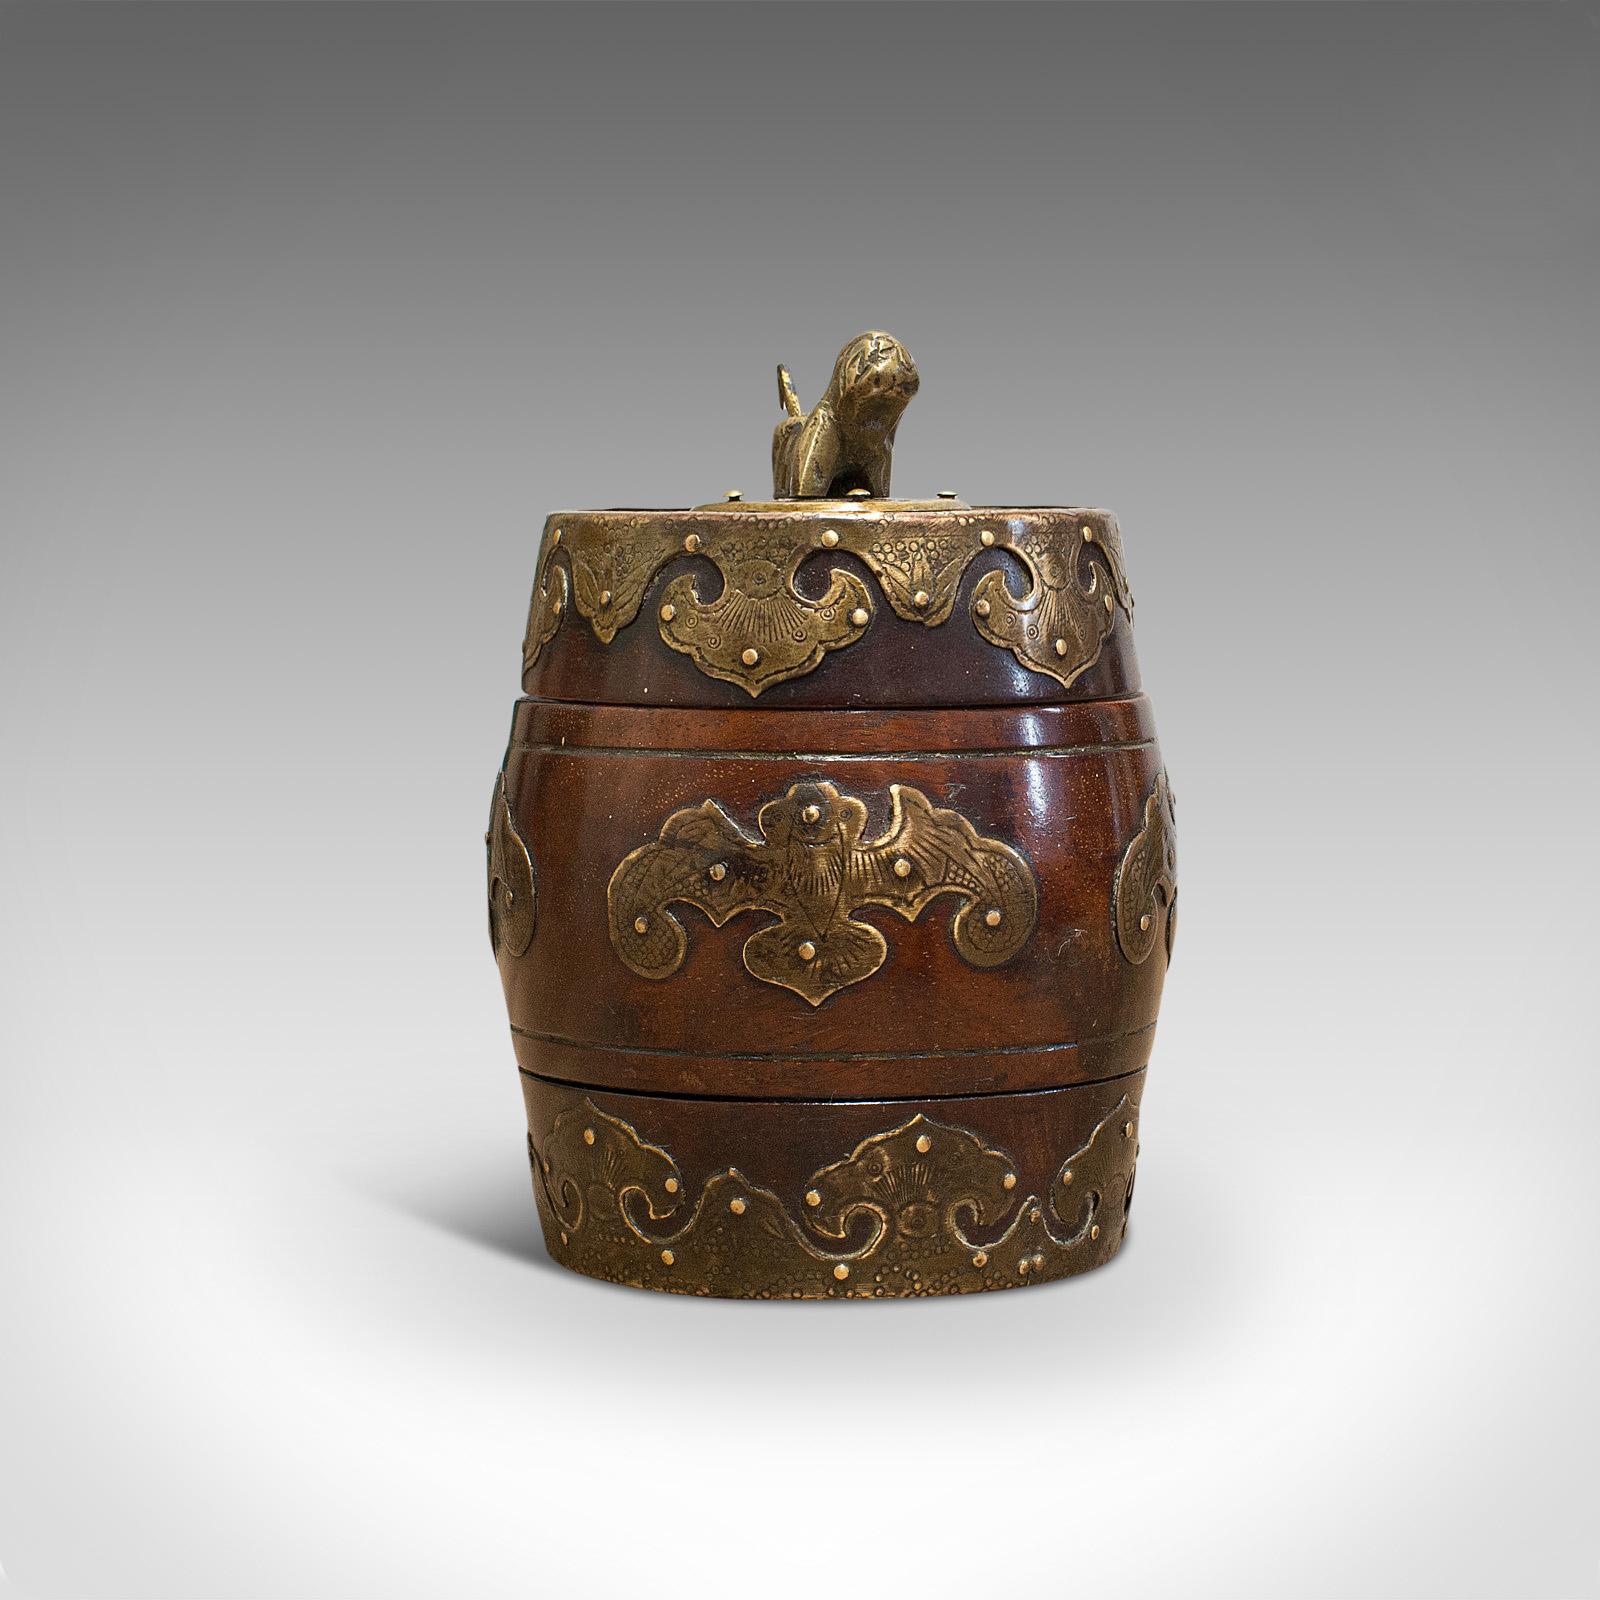 Small Antique Spice Jar, Chinese, Mahogany, Brass, Decorative Pot, Victorian In Good Condition For Sale In Hele, Devon, GB